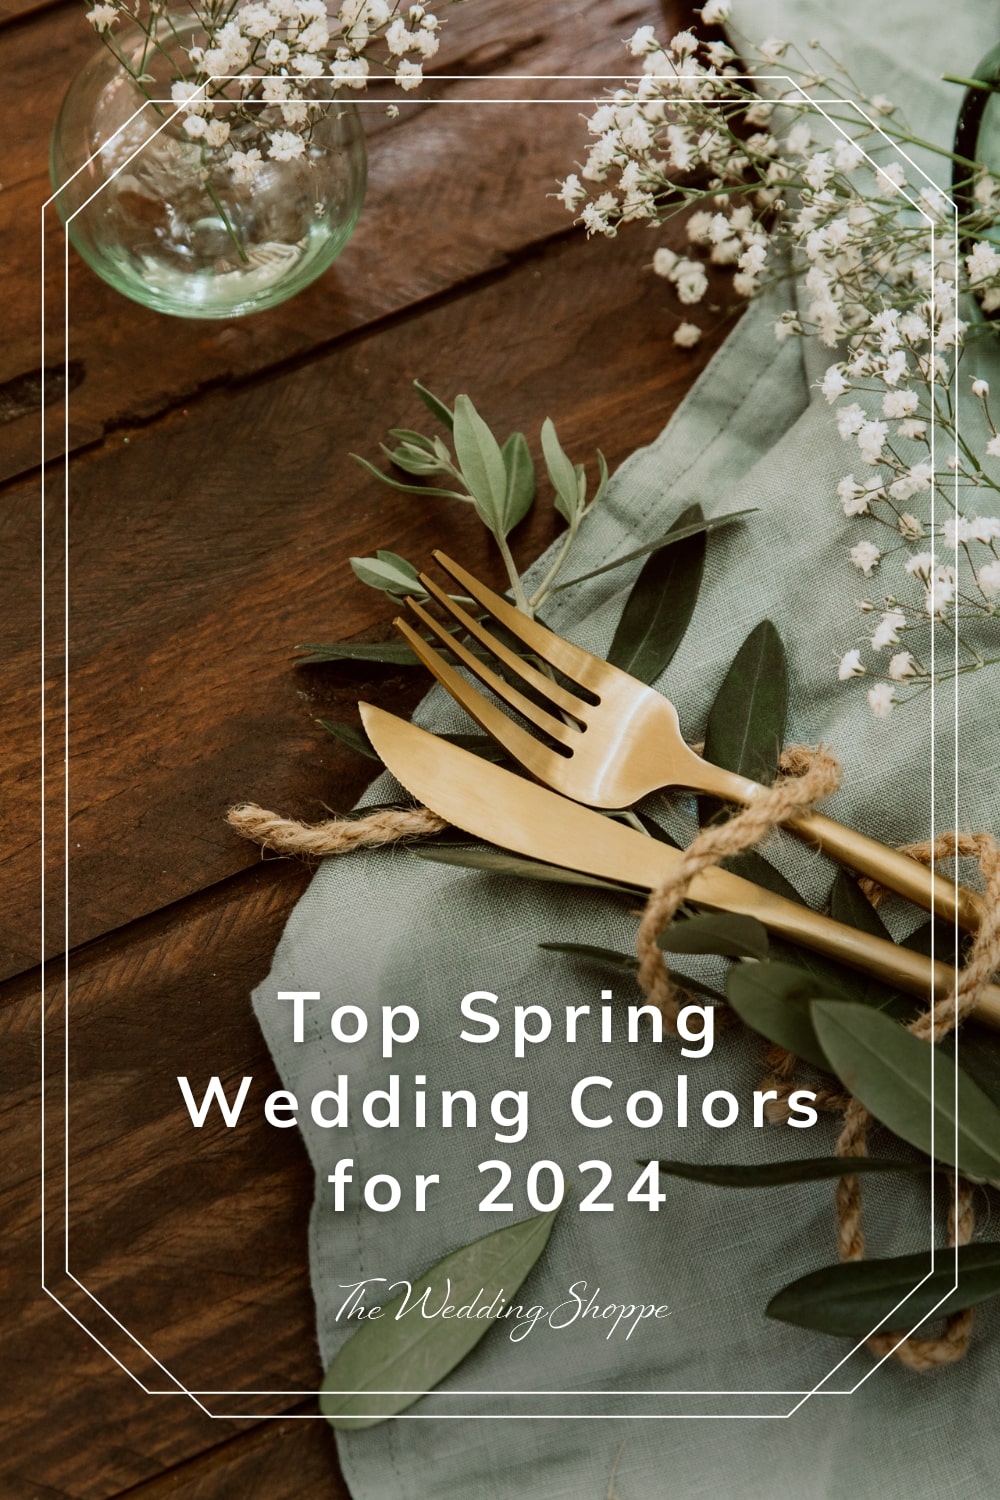 pinnable graphic for "Top Spring Wedding Colors for 2024" from The Wedding Shoppe